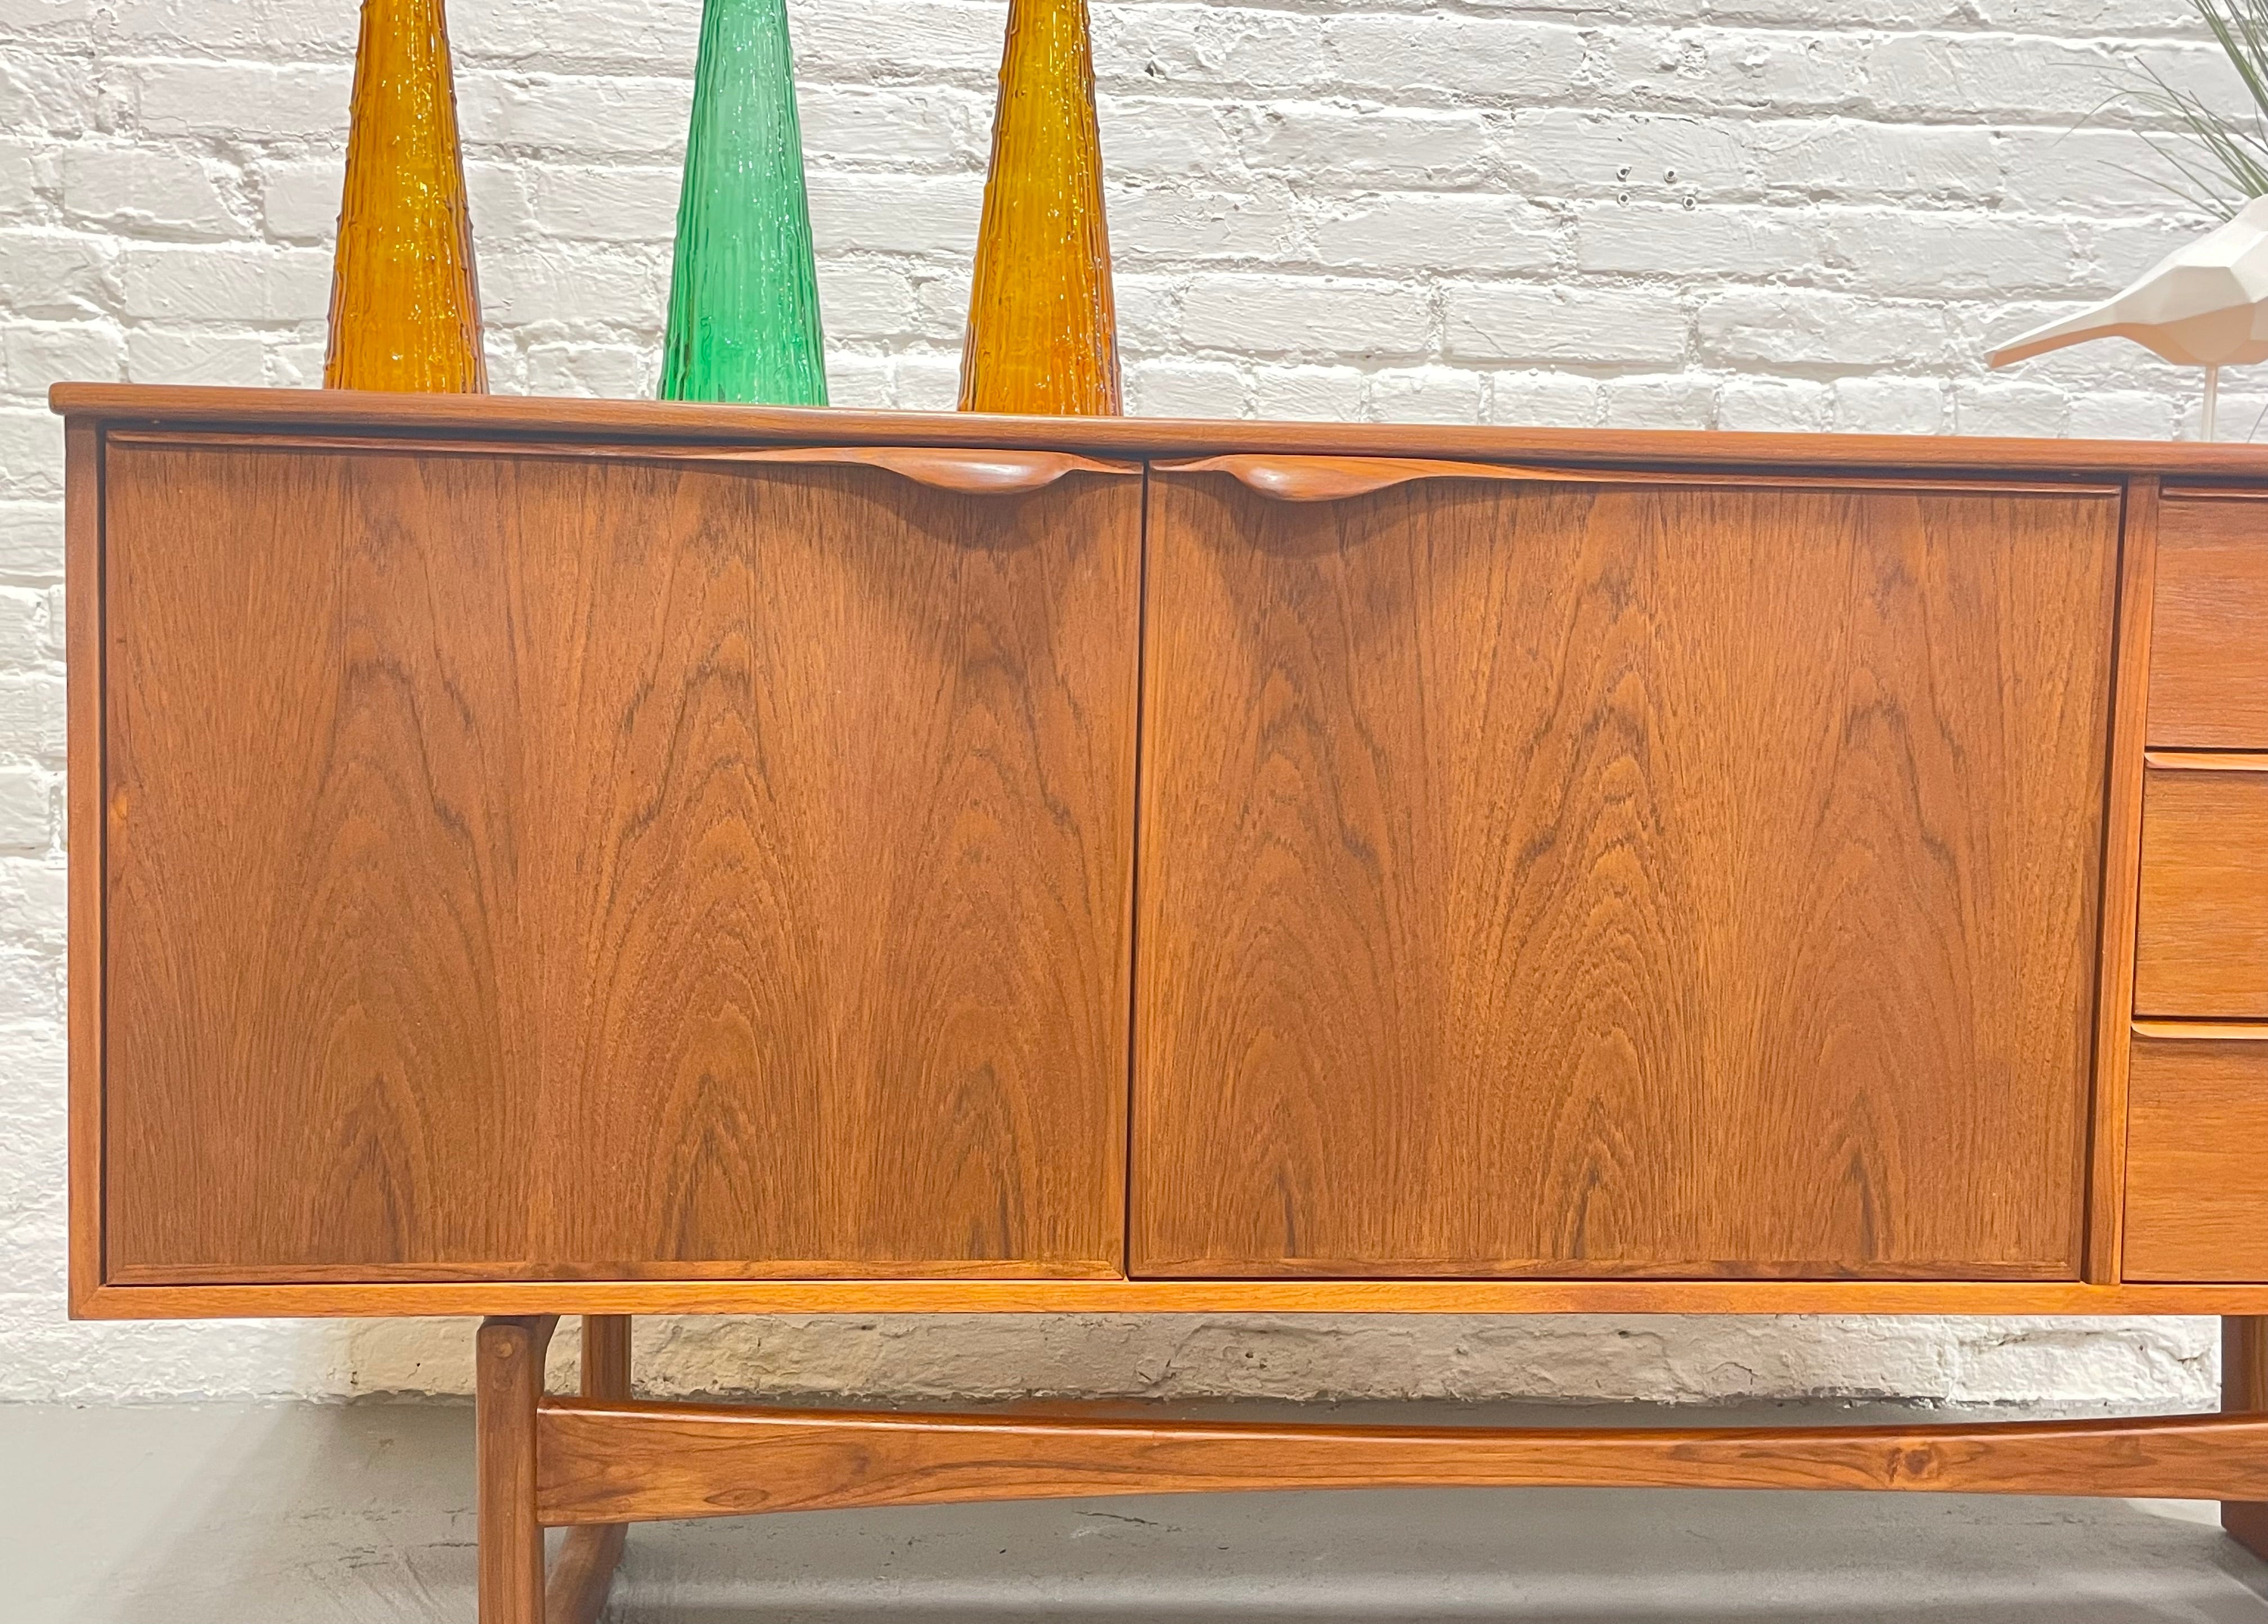 SCULPTED Mid Century Modern Danish styled CREDENZA media stand